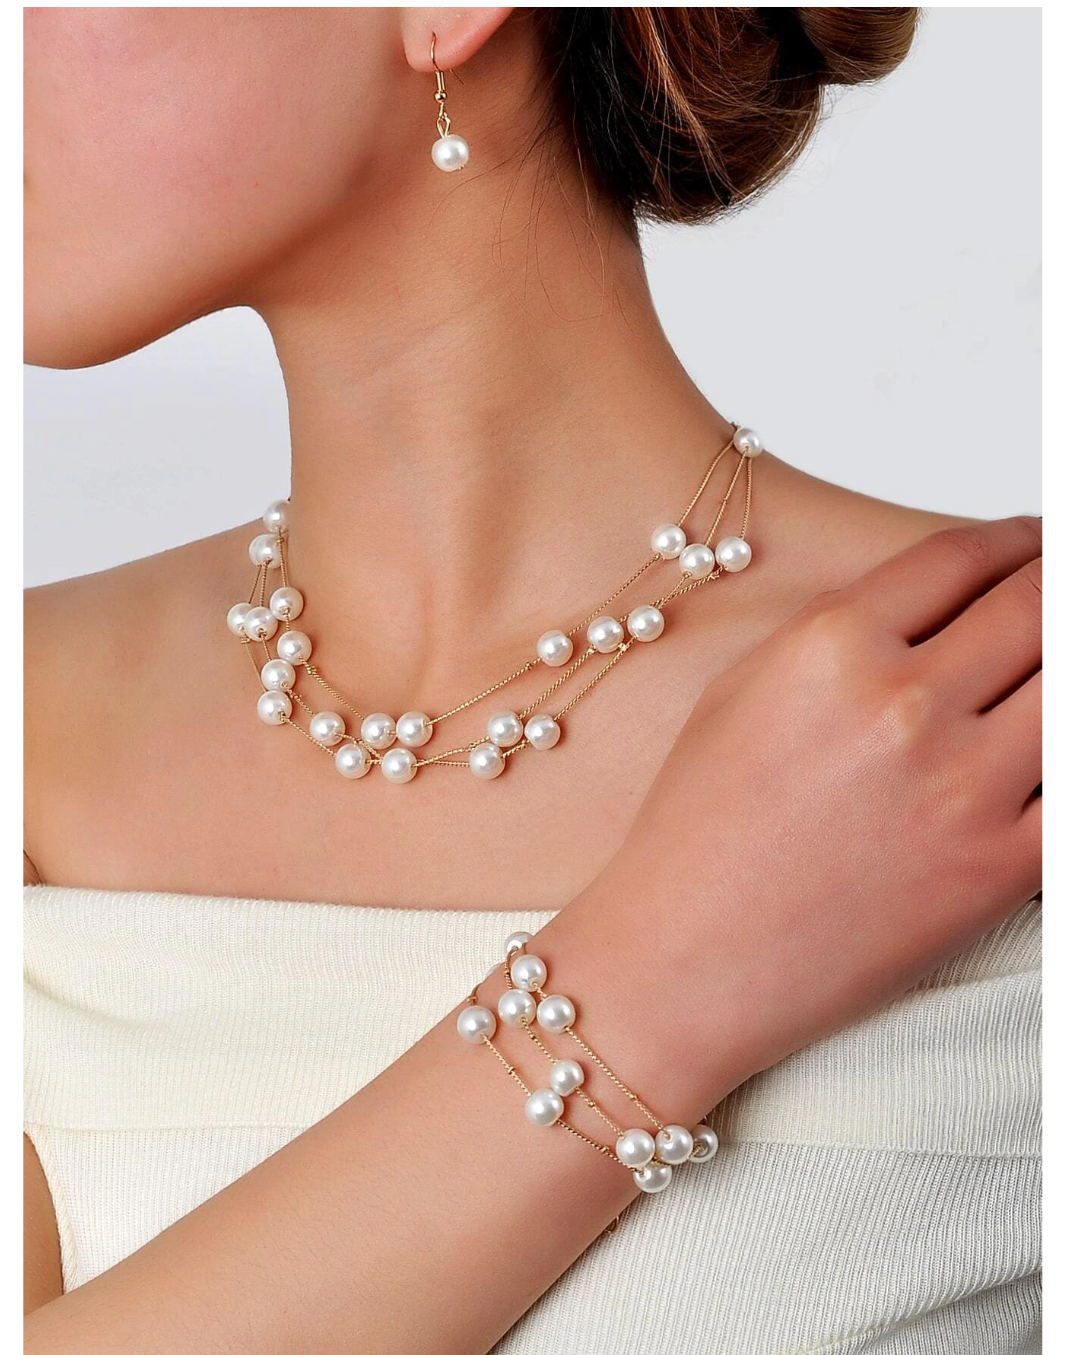 Pearlescent Elegance: Unveiling the Allure of our 4pcs Faux Pearl Decor Jewelry Set